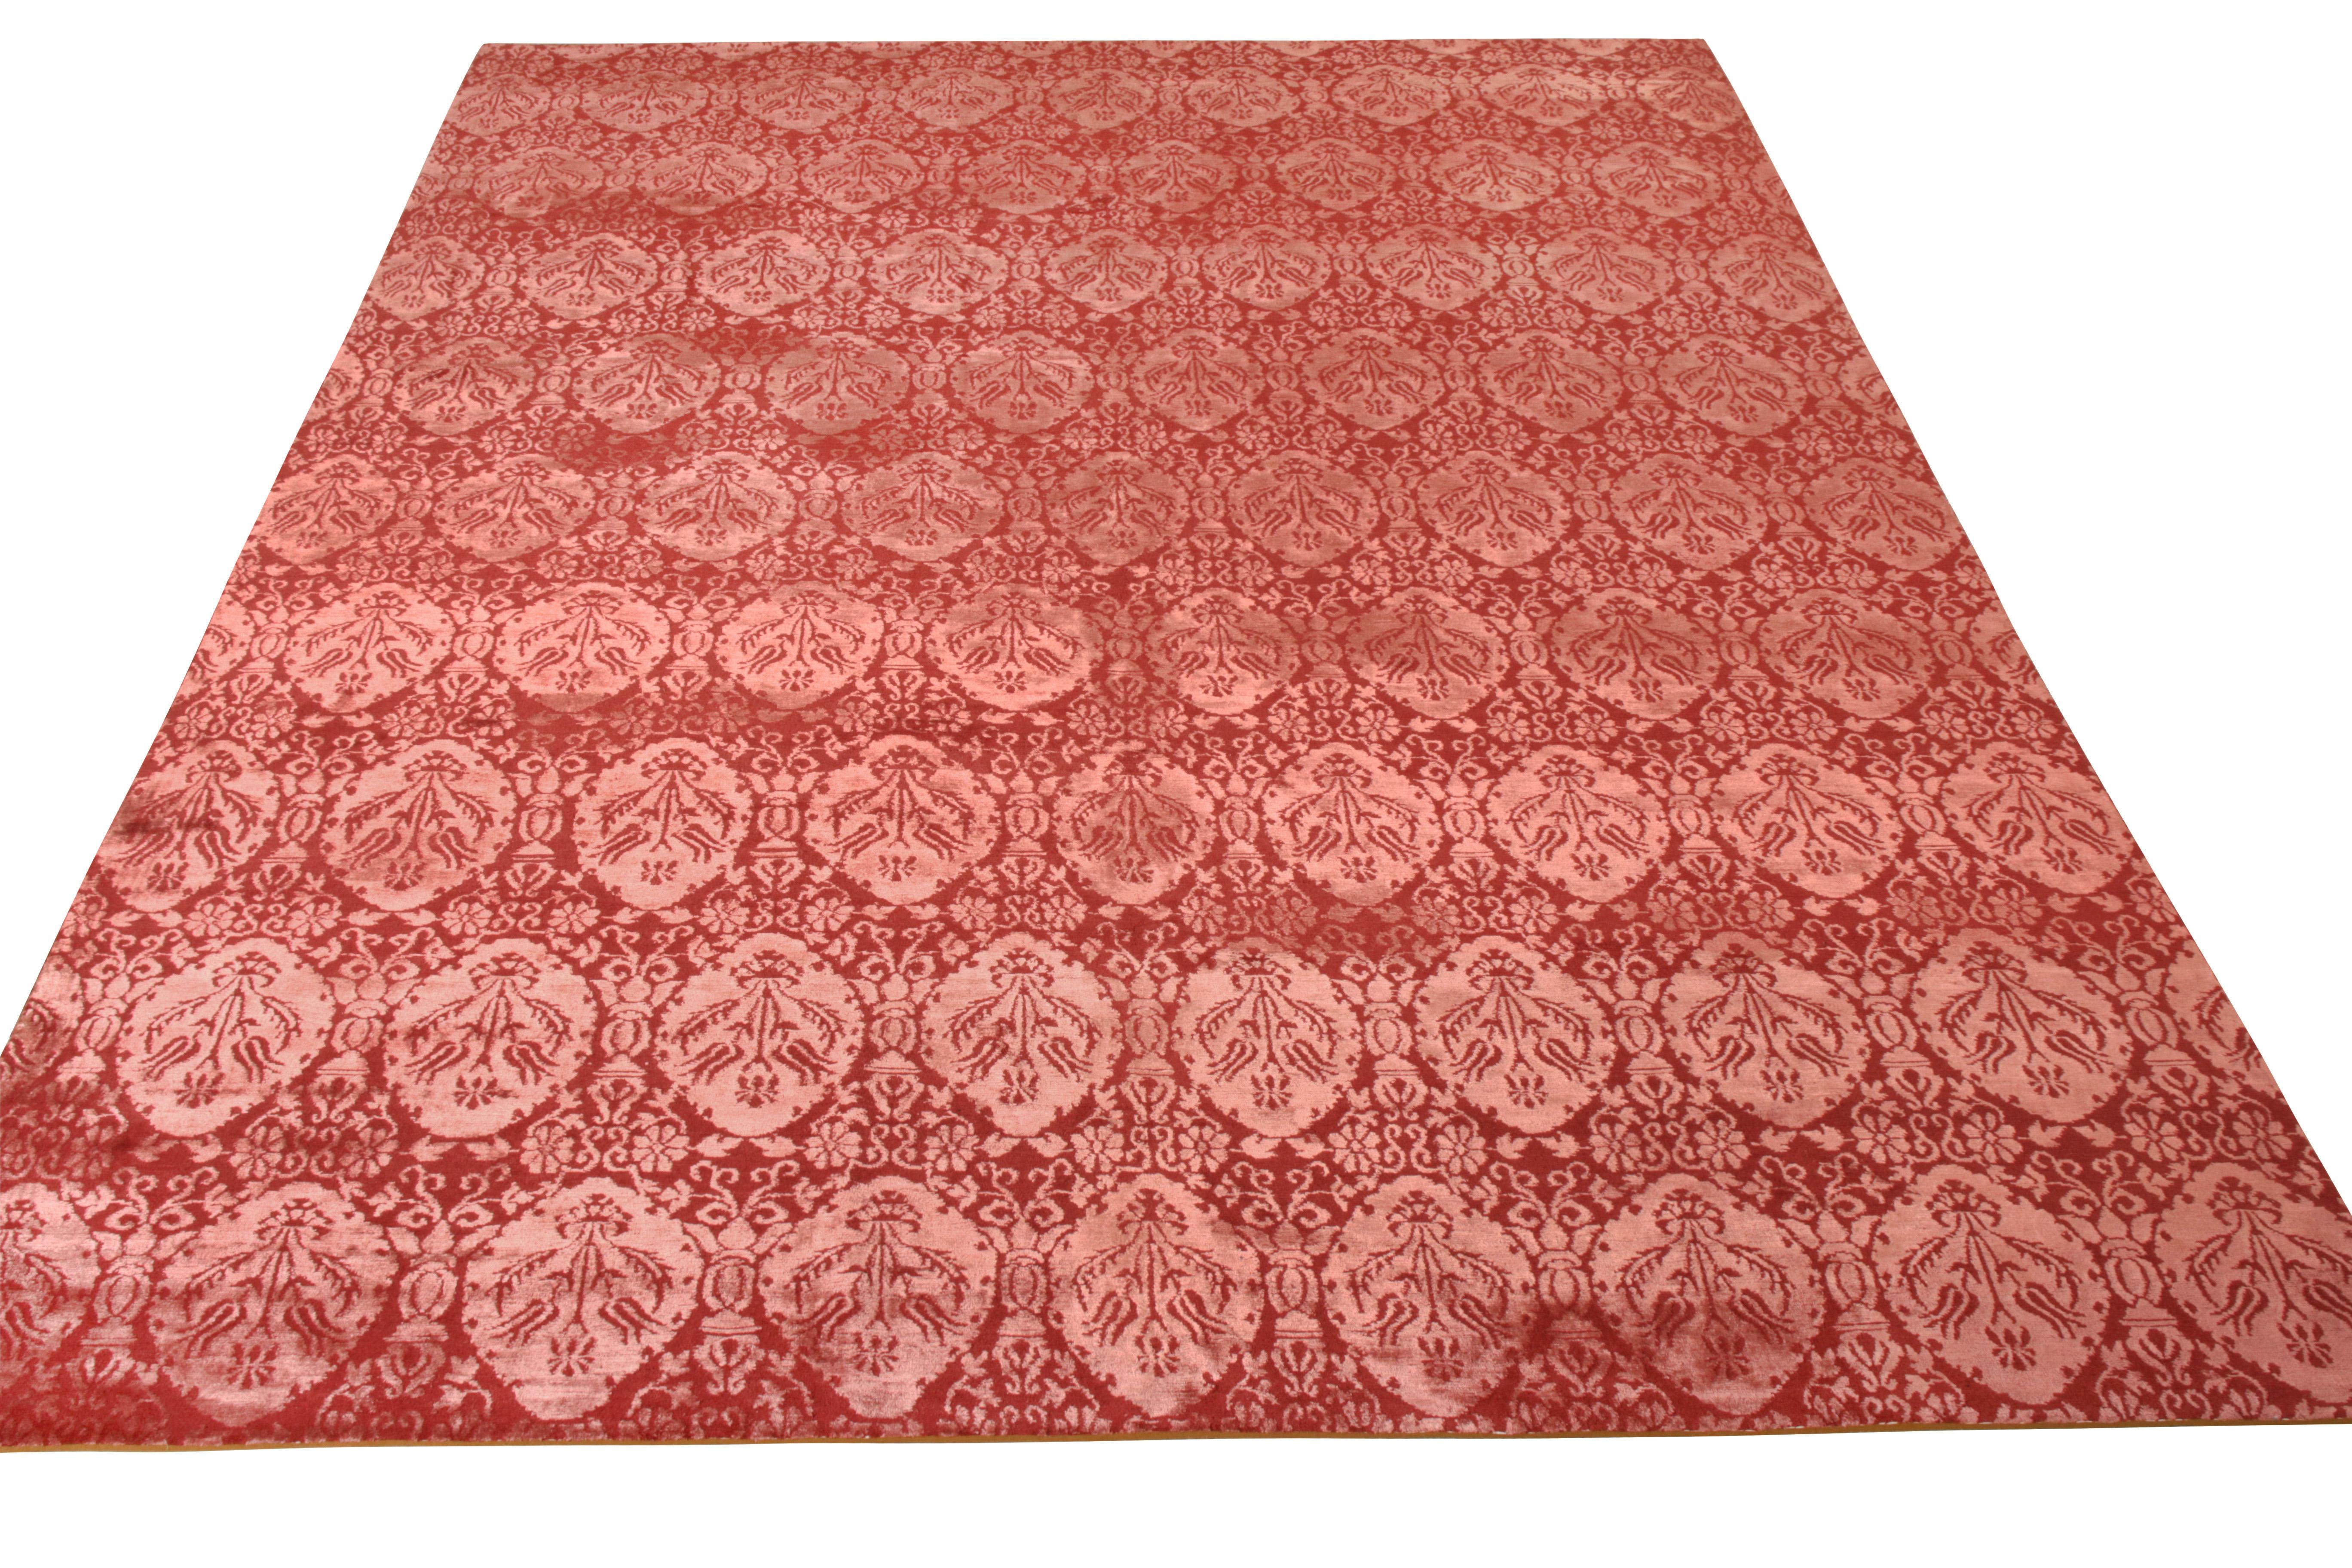 Joining our European collection is this enticing entry exuding Venetian sensibilities in 9 x 12. Inspired from the historical ‘Medici’ design, the rug enjoys a beautiful placement of Italian inspired floral patterns prevailing in striking red and